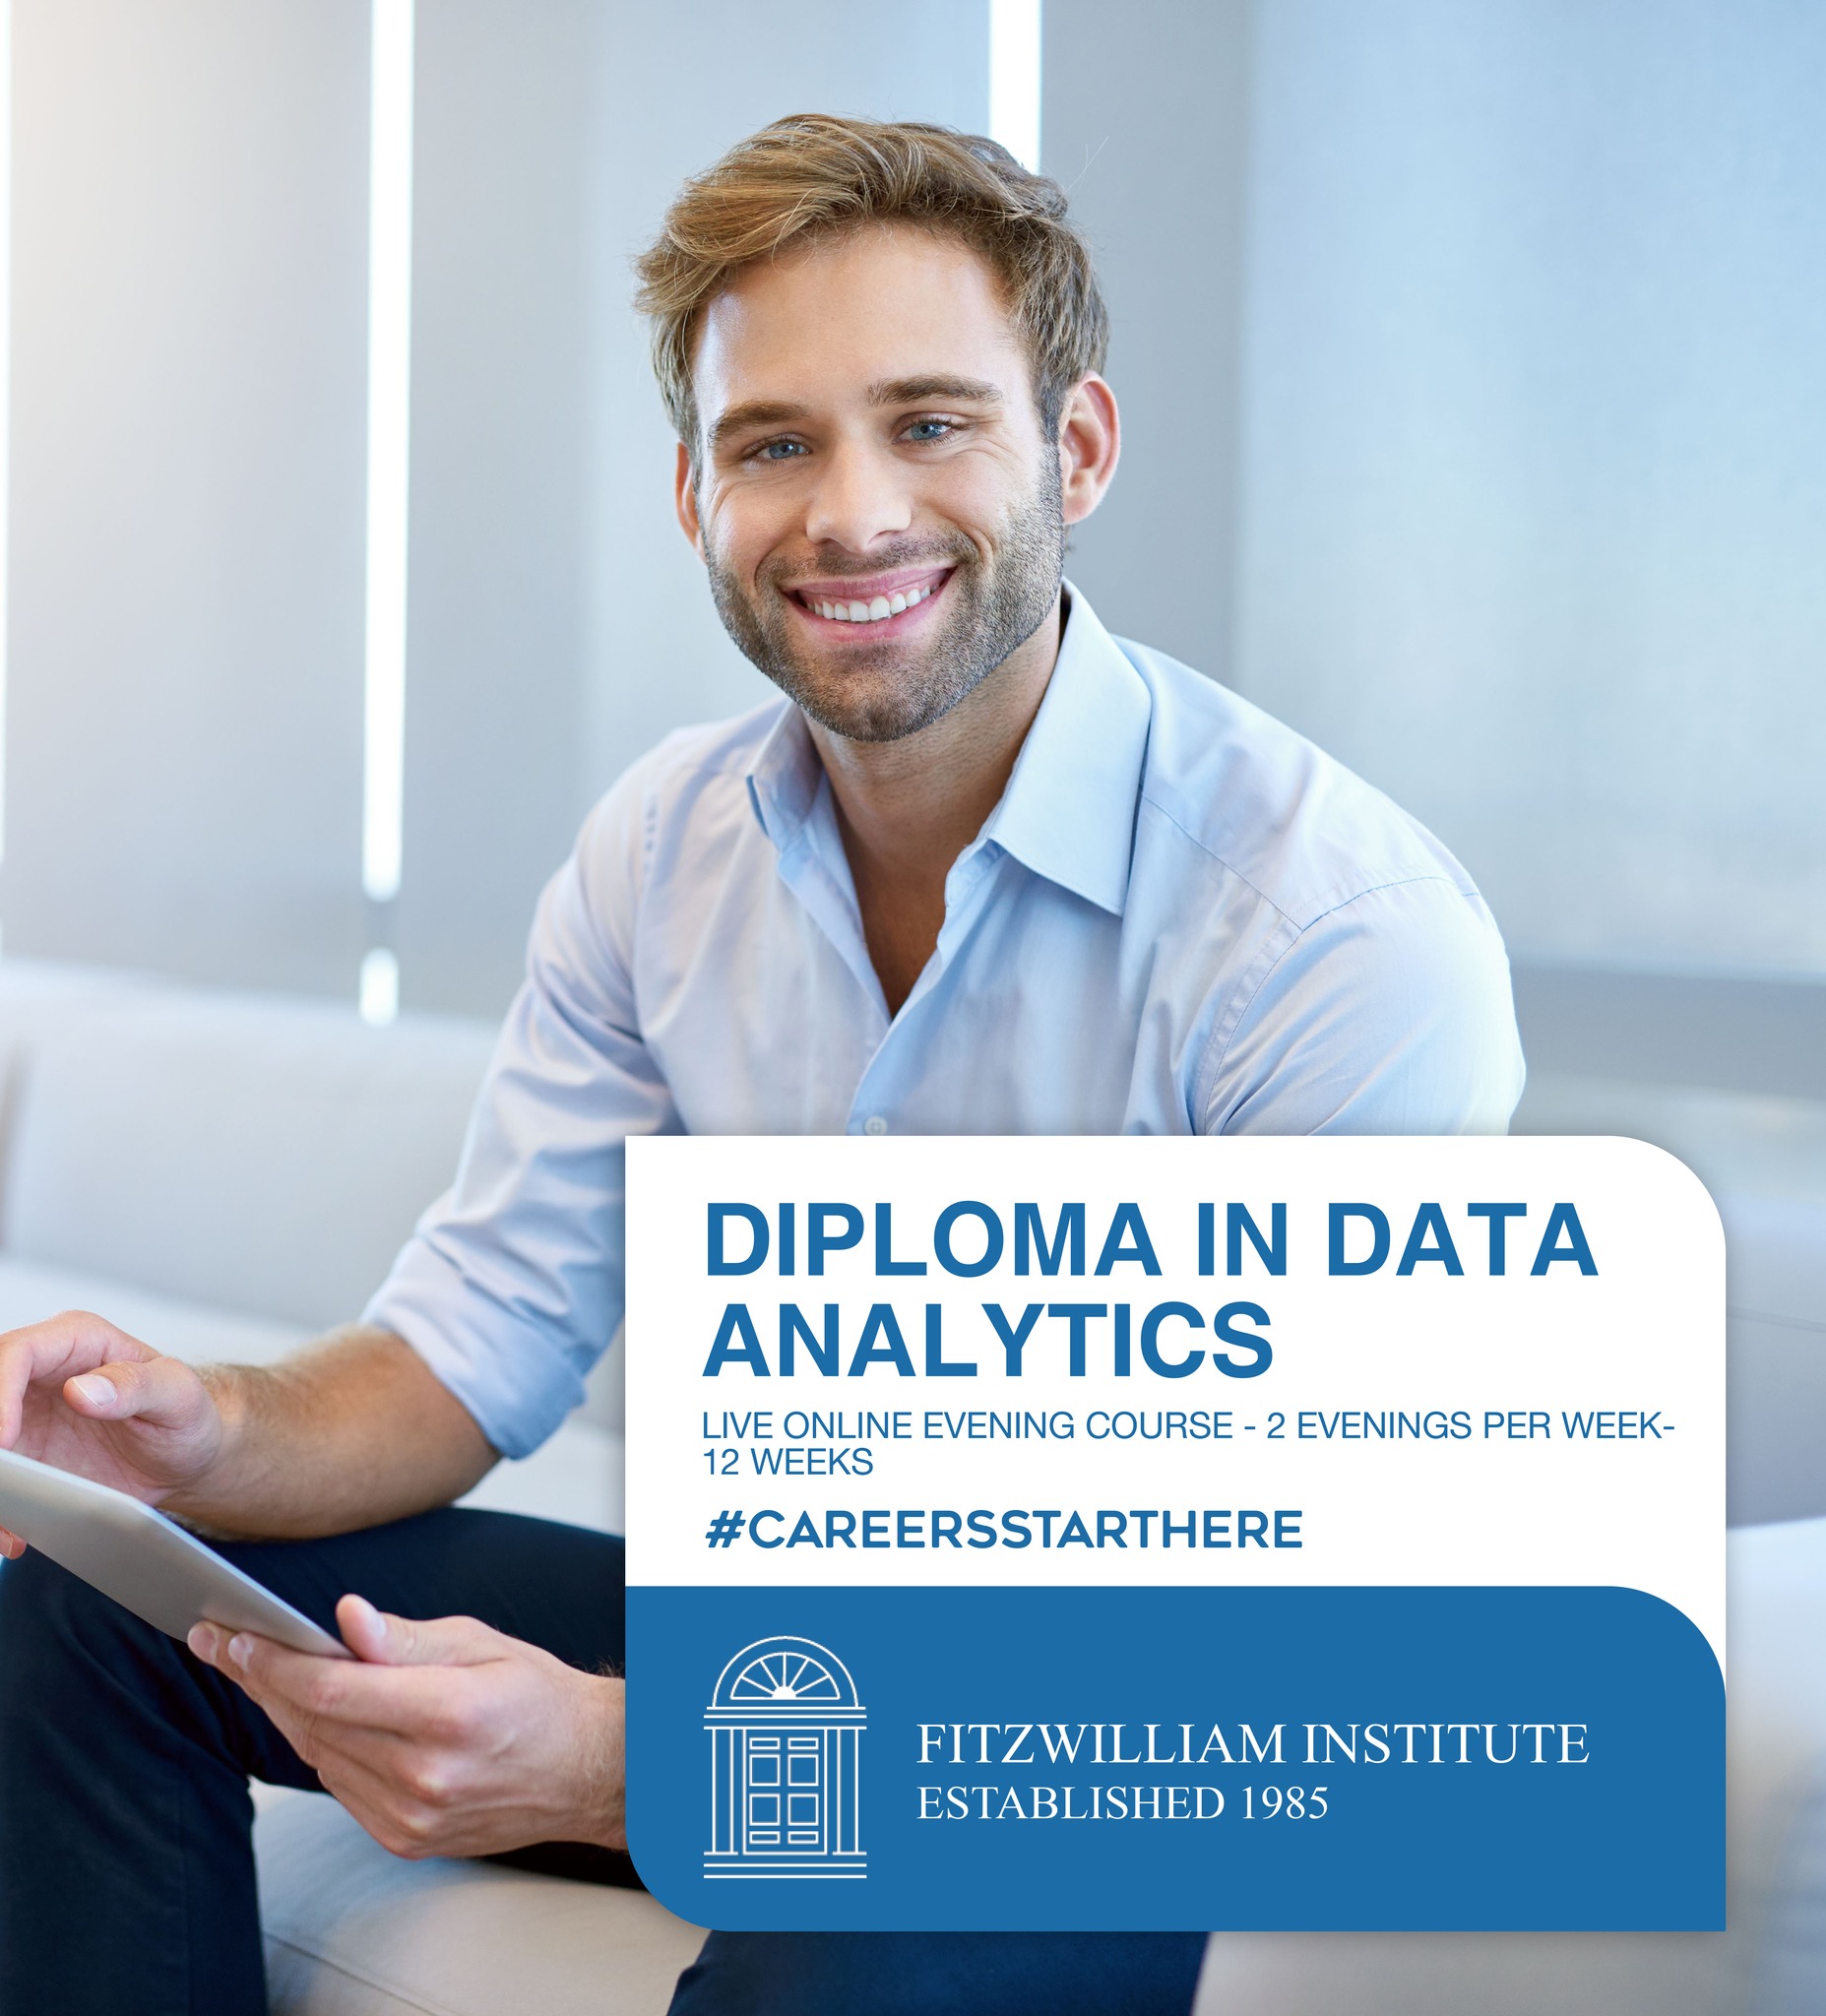 Accepting-final-enrolment-on-the-February-intake-live-online-Diploma-in-Data-Analytics.jpg